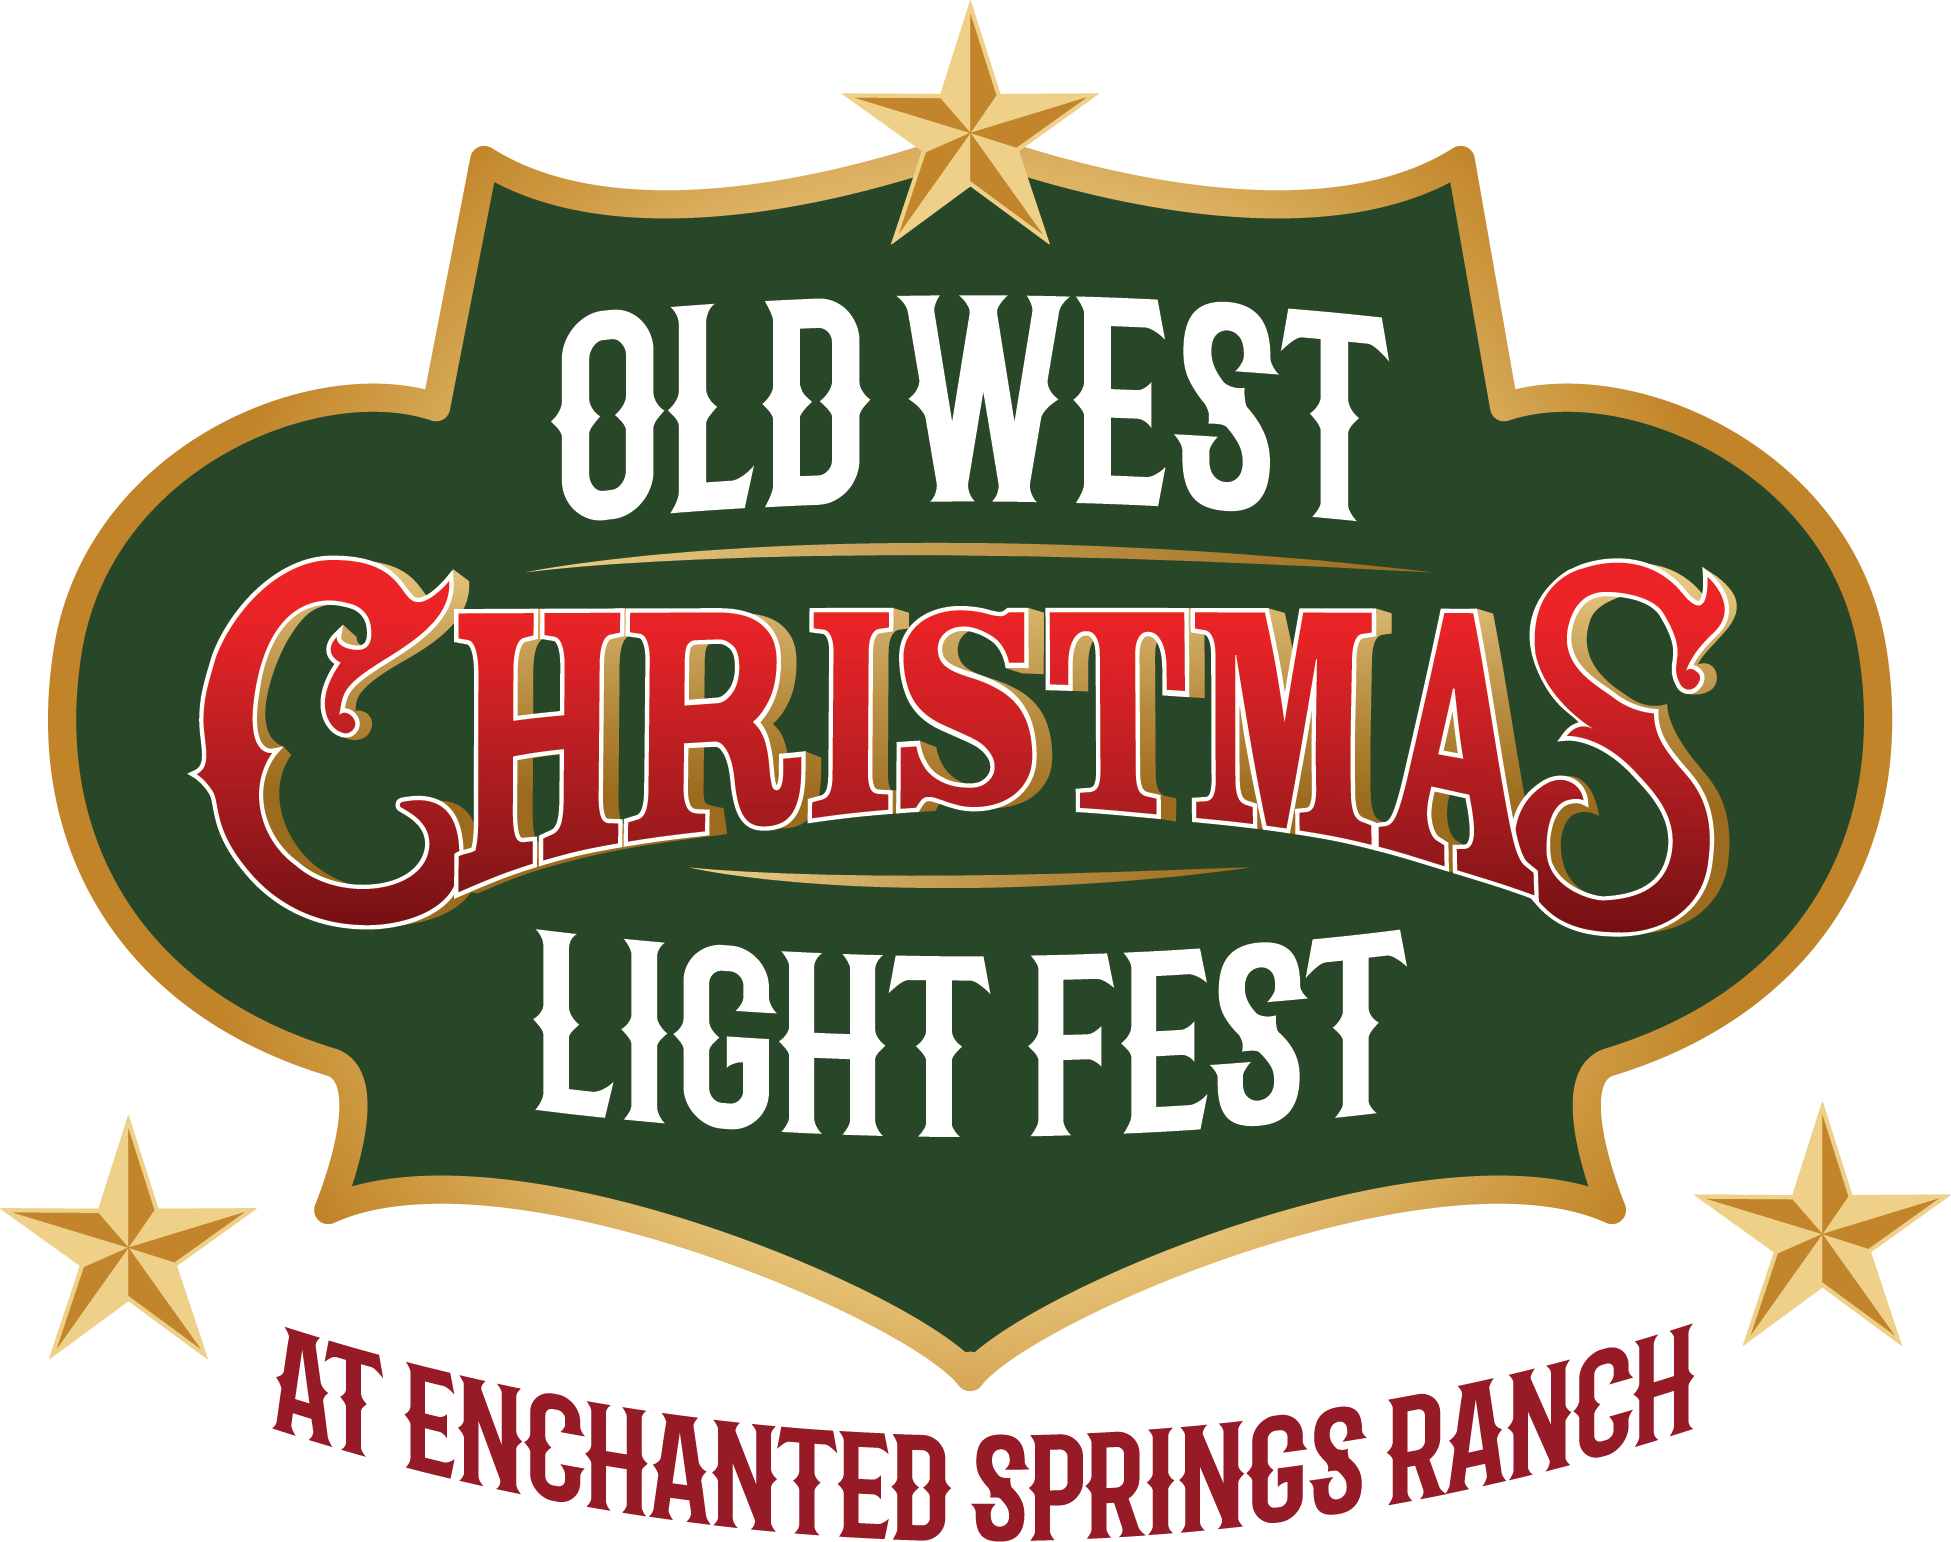 Home of Old West Christmas Light Fest at Enchanted Springs Ranch